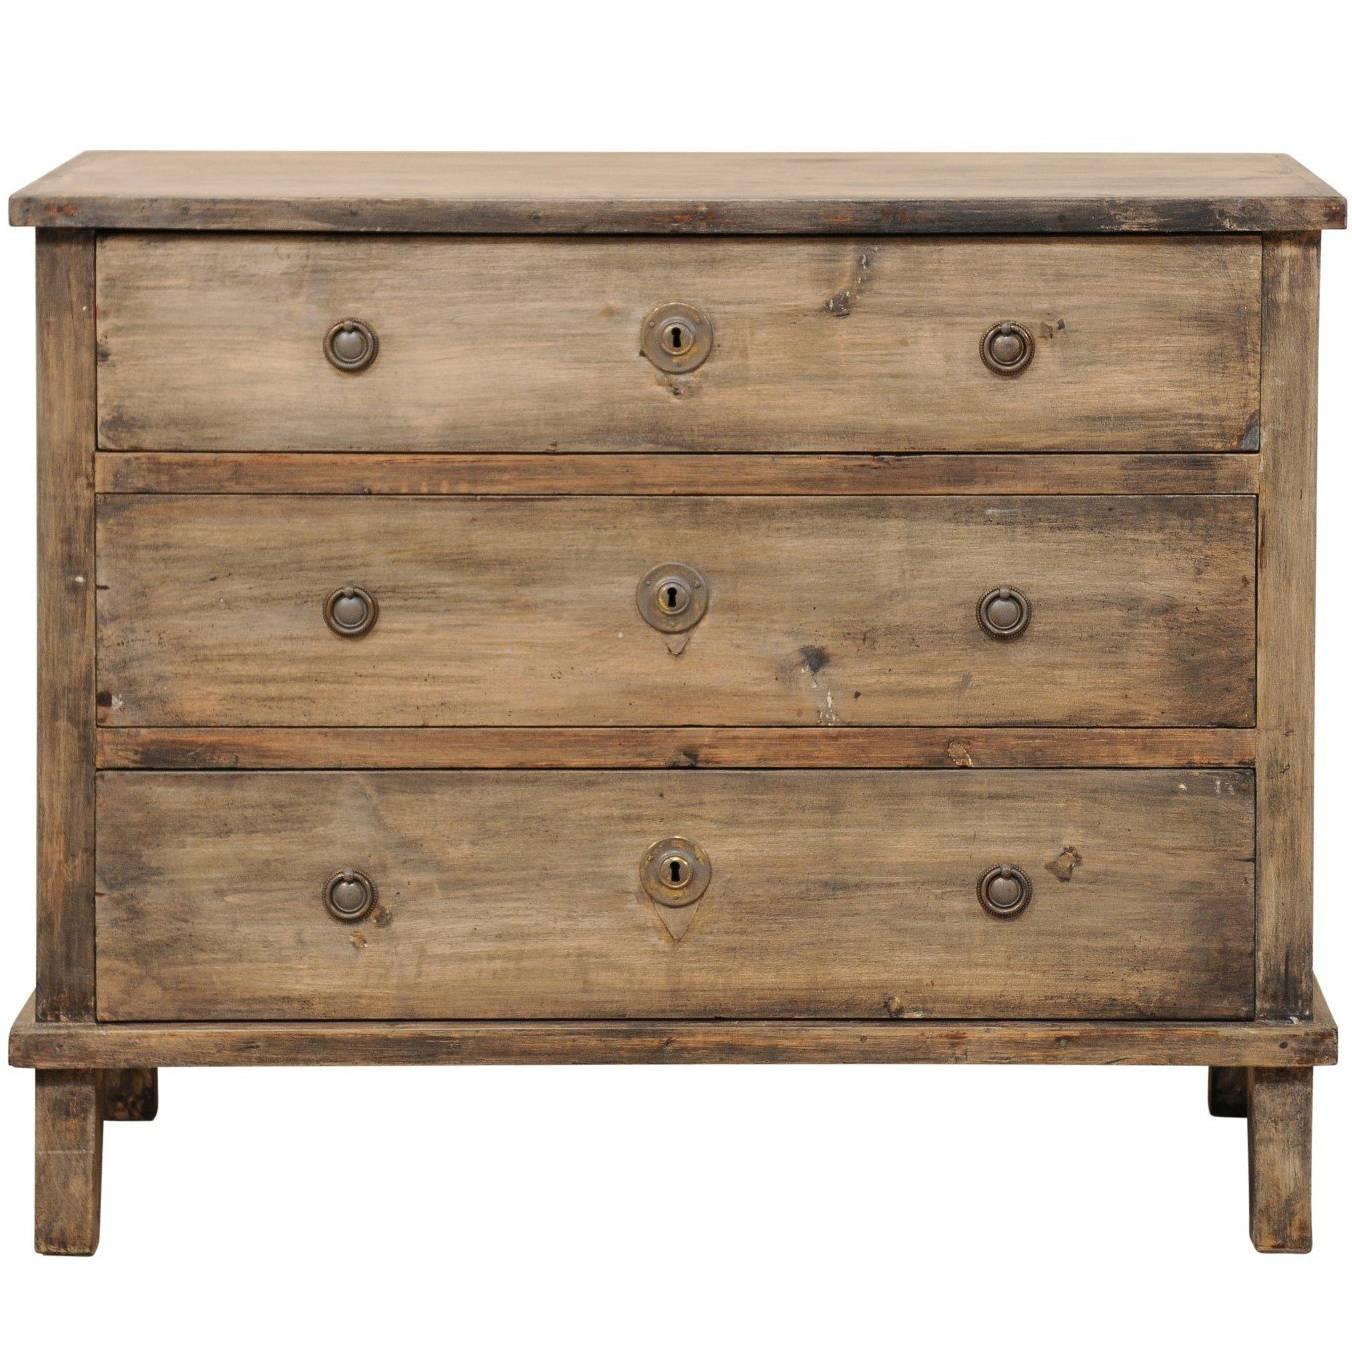 Swedish, 19th Century, Wood Chest with Washes of Grey, Taupe and Dark Brown